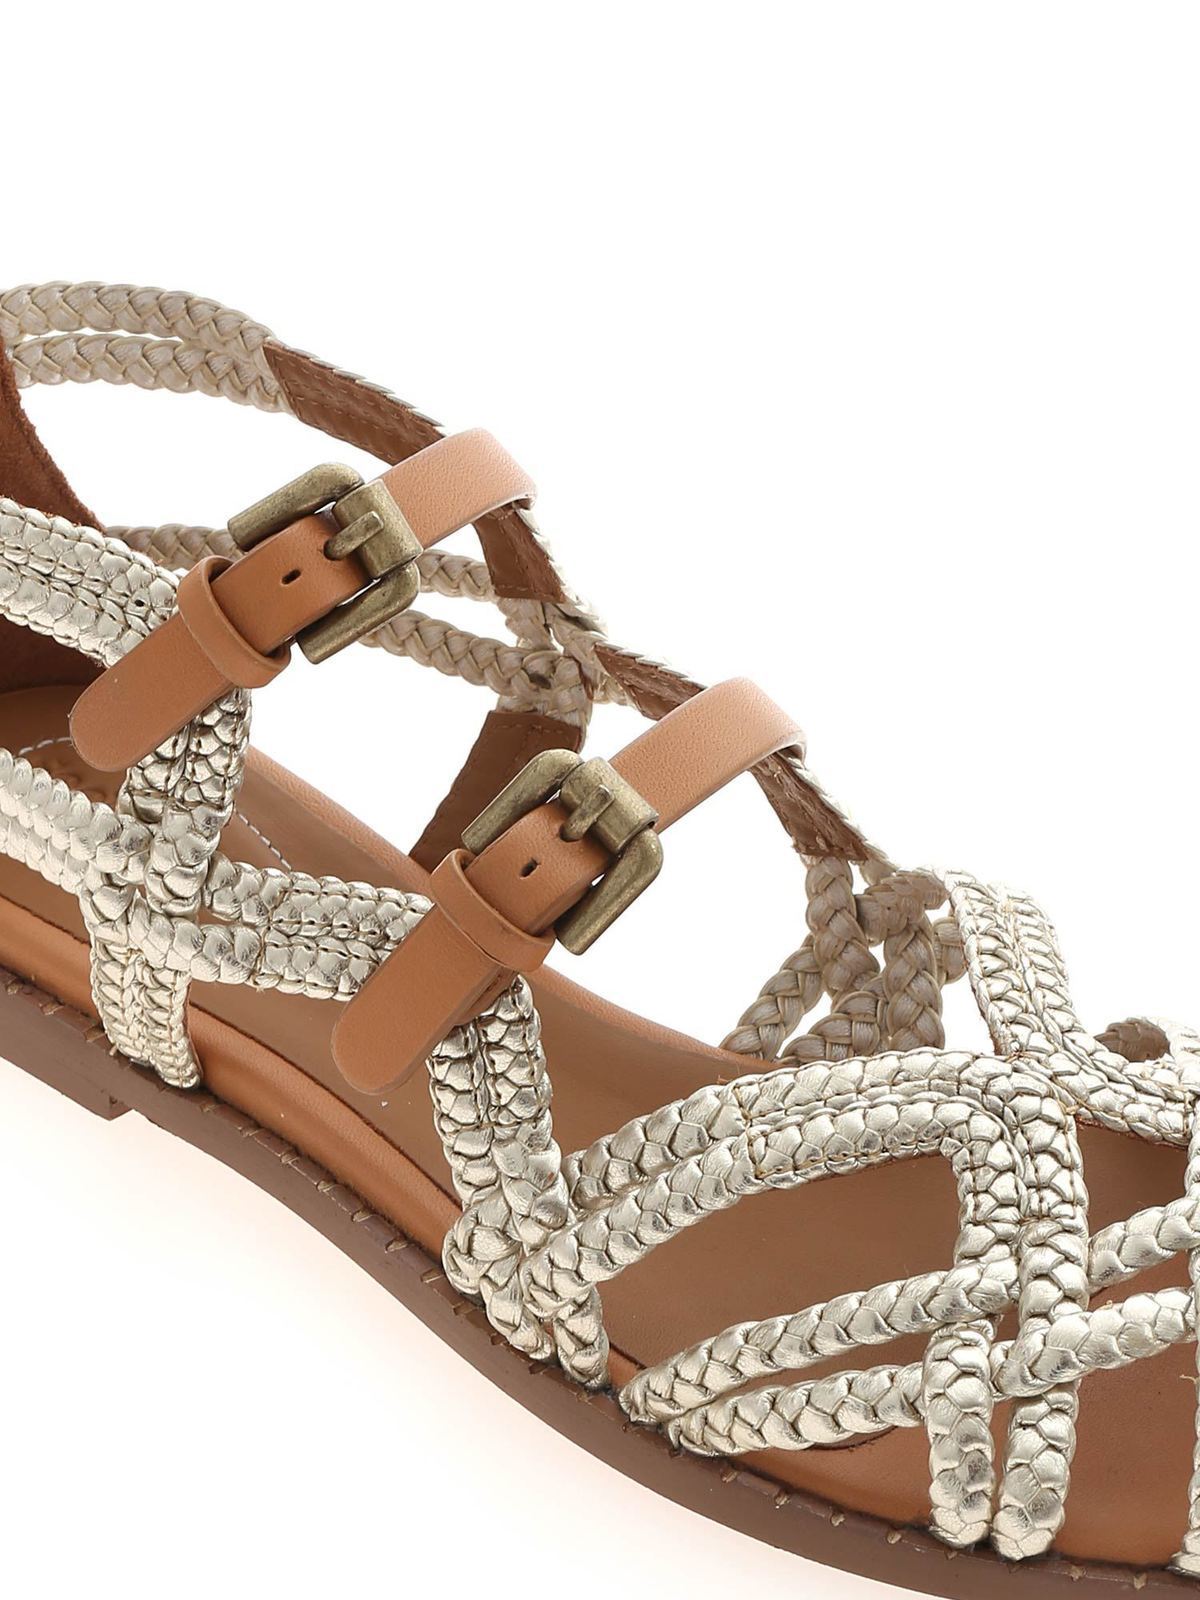 Patch vereist Bedreven Sandals See by Chloé - Adria sandals in platinum and leather color -  SB32090A056